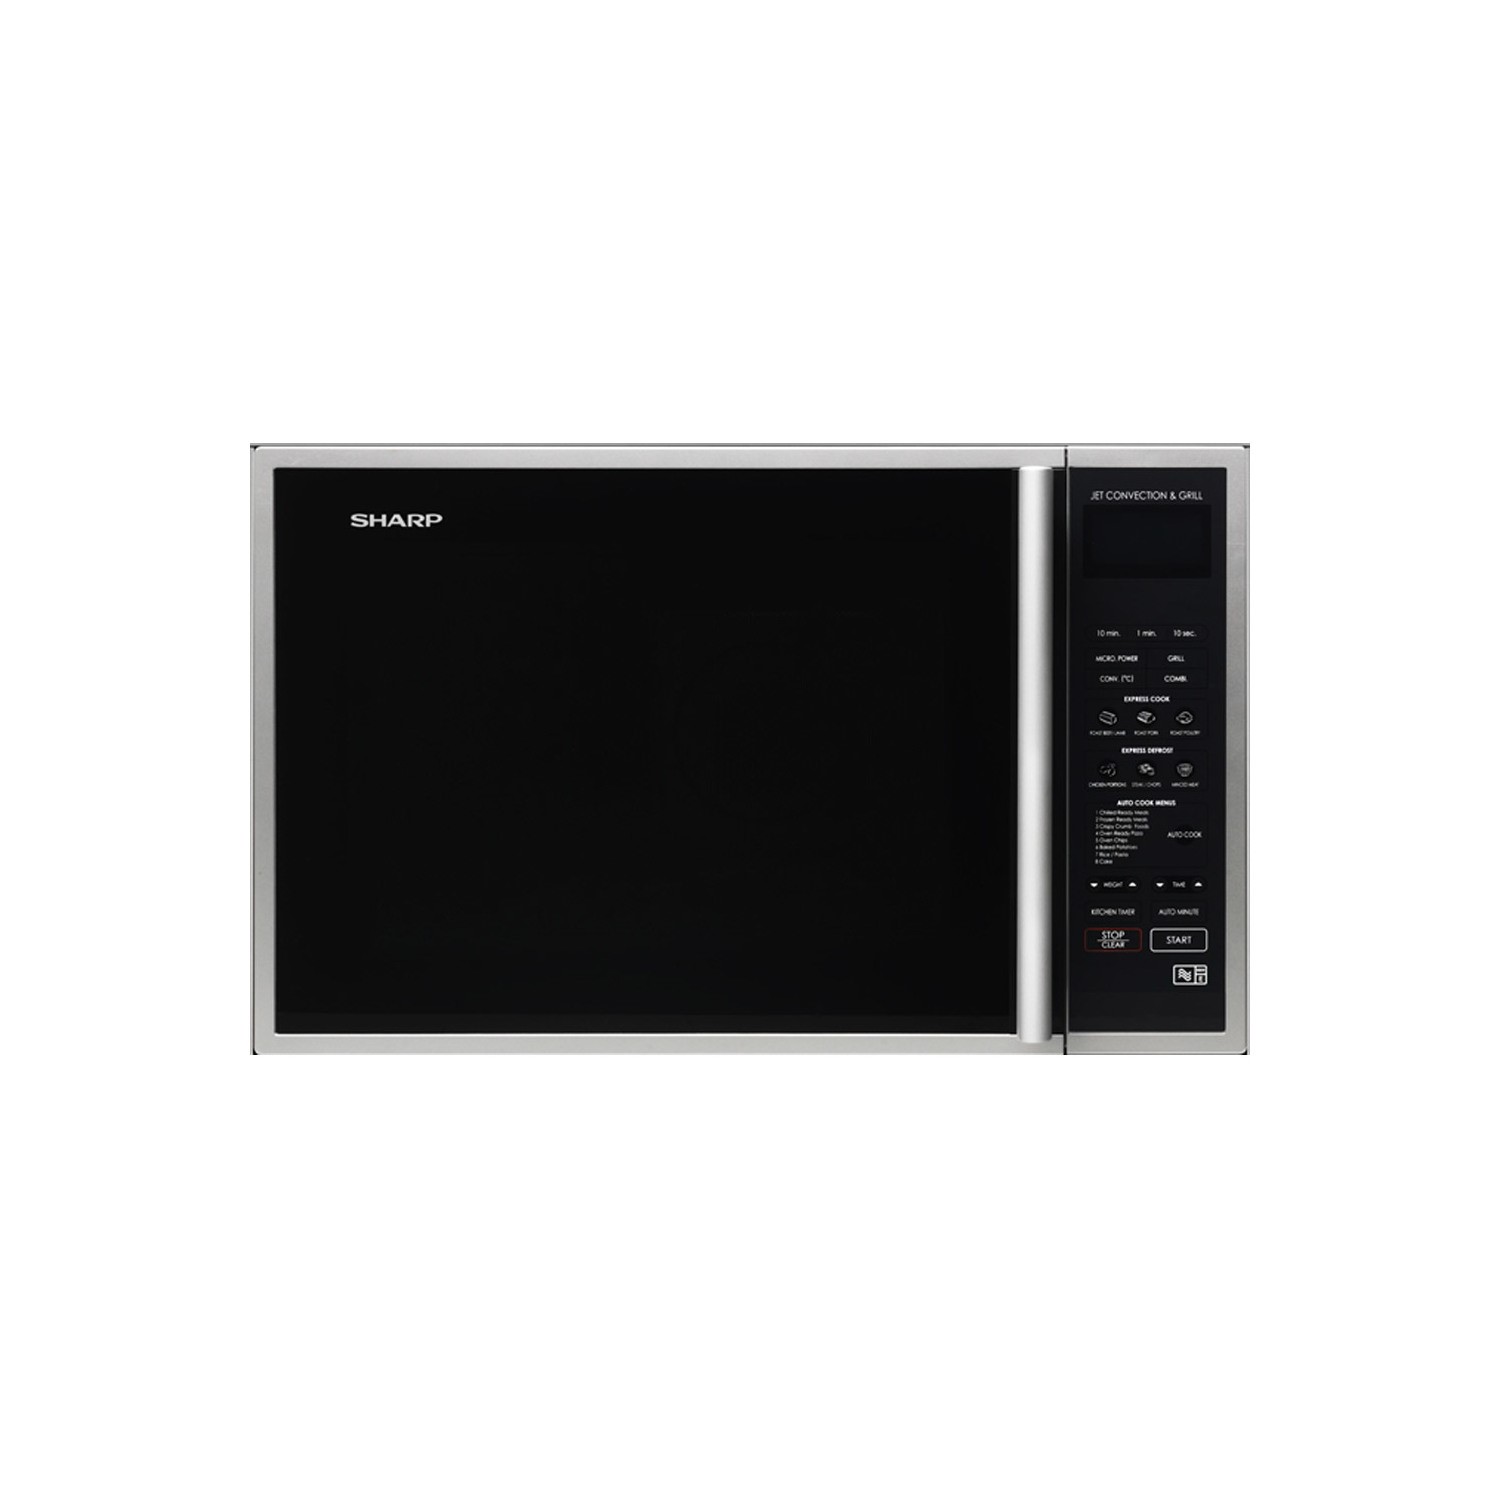 Refurbished Sharp R959SLMAA 40L 900W Convection Microwave with 1400W Quartz Grill - Silver